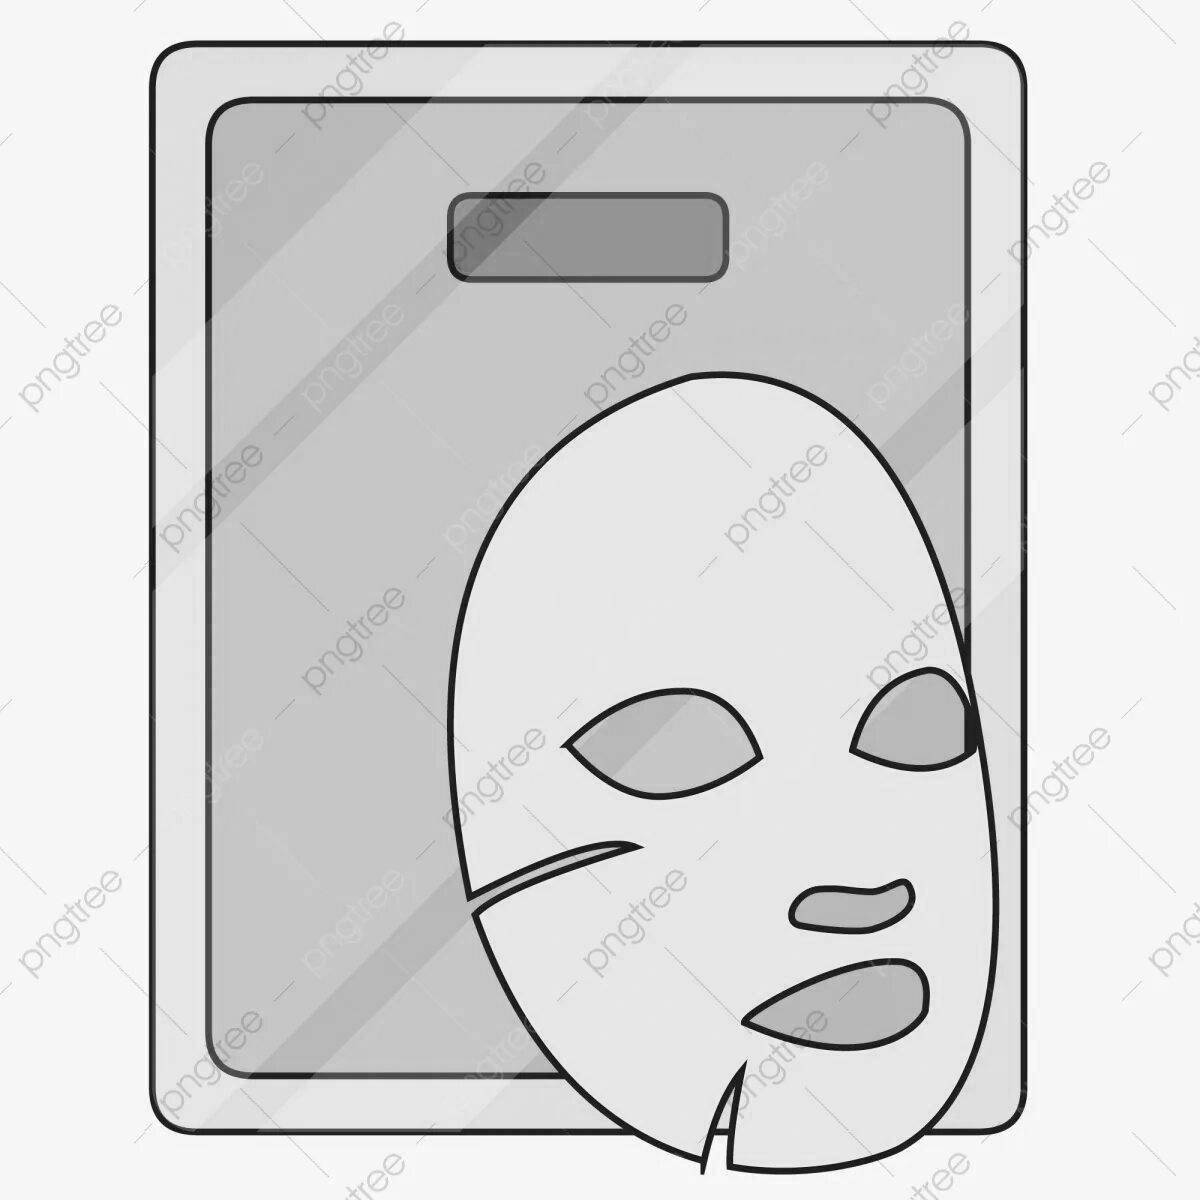 Imaginative fabric face mask coloring page